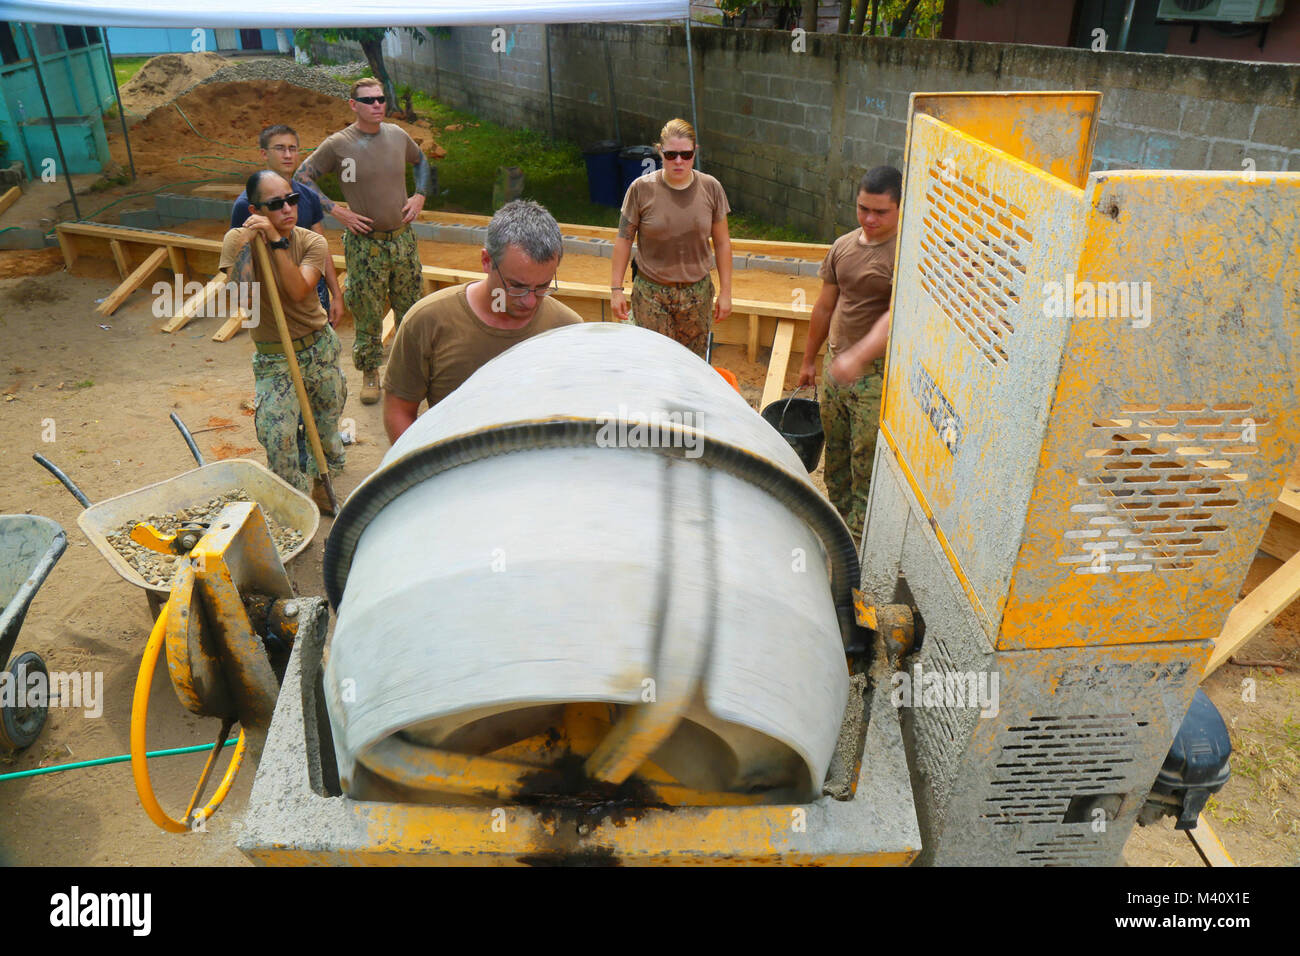 150902-A-ZA034-051 PUERTO CASTILLA, Honduras (Sept. 2, 2015) Sailors assigned to Construction Battalion Maintenance Unit 202 and Military Sealift Command hospital ship USNS Comfort (T-AH 20), mix cement at an engineering site established at The Centro Basico 14 de Agosto Lugar Puerto Castilla School during Continuing Promise 2015. Continuing Promise is a U.S. Southern Command-sponsored and U.S. Naval Forces Southern Command/U.S. 4th Fleet-conducted deployment to conduct civil-military operations including humanitarian-civil assistance, subject matter expert exchanges, medical, dental, veterina Stock Photo